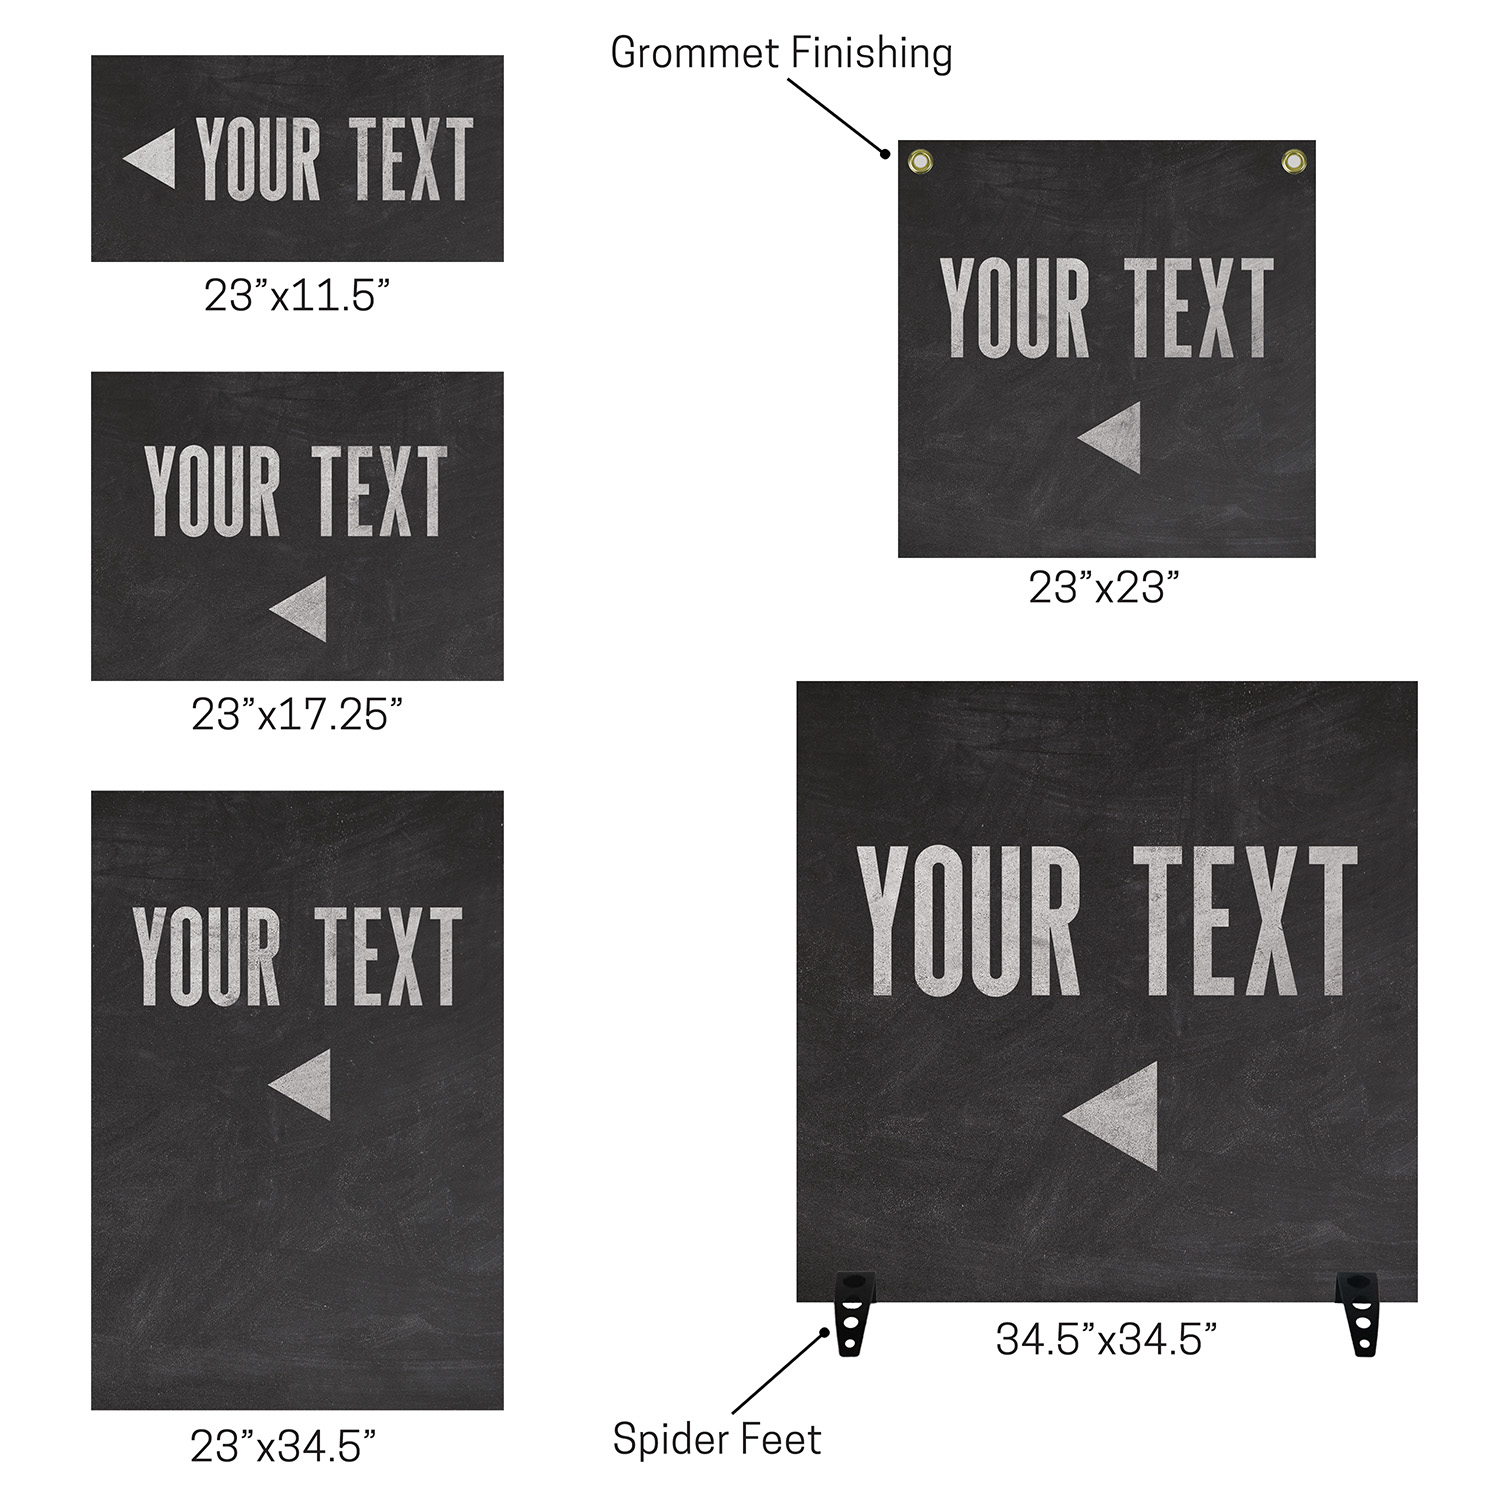 Rigid Signs, Curved Colors Products, Curved Colors Elementary, 23 x 34.5 2